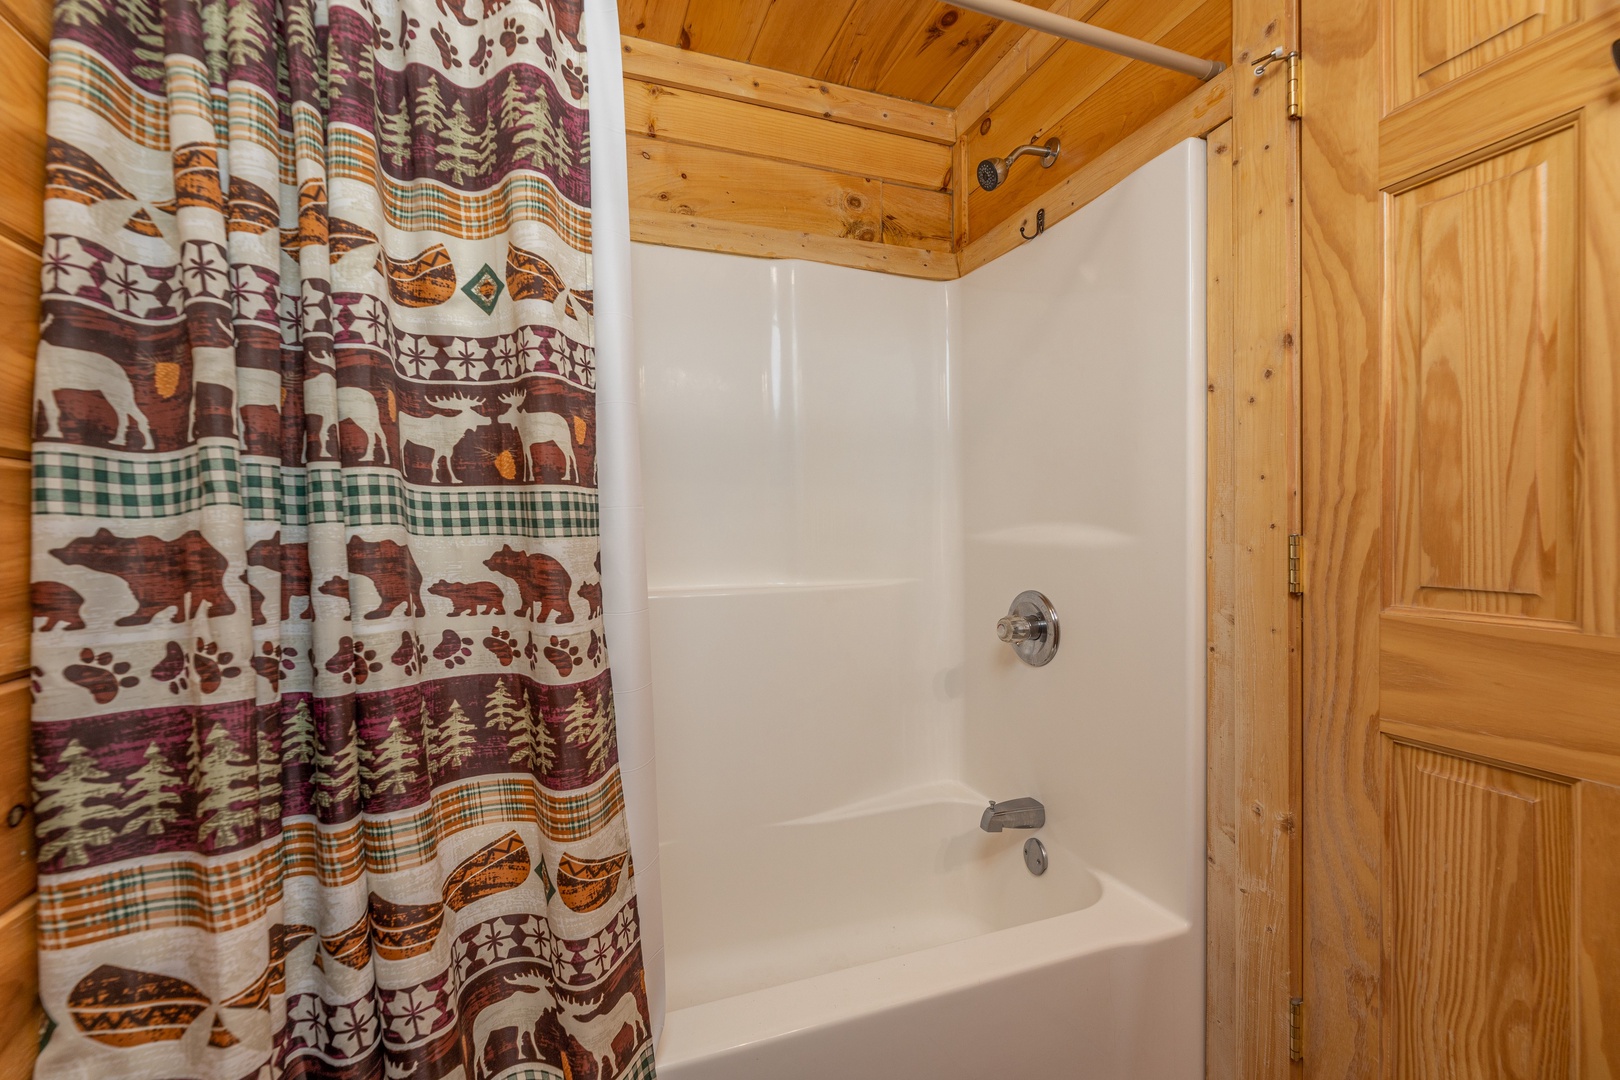 Bathroom with a tub and shower at Bears Don't Bluff, a 3 bedroom cabin rental located in Pigeon Forge